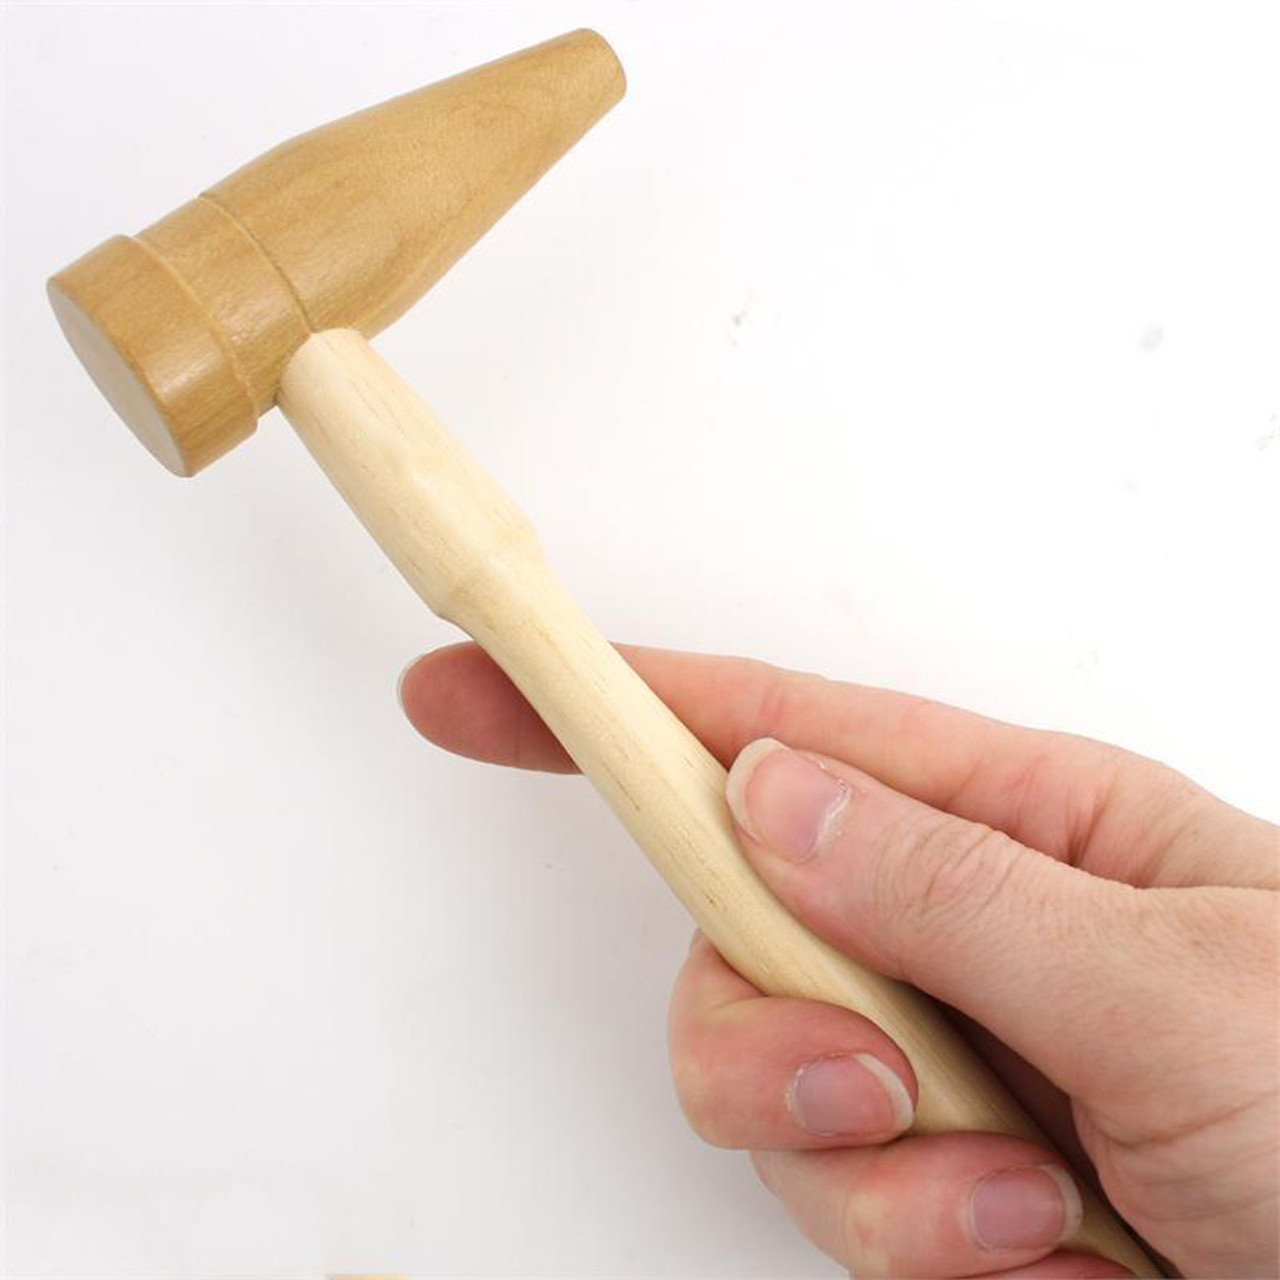 Premium Rawhide Mallet Hammer for Jewelry or Metal 6 oz. - Hammers